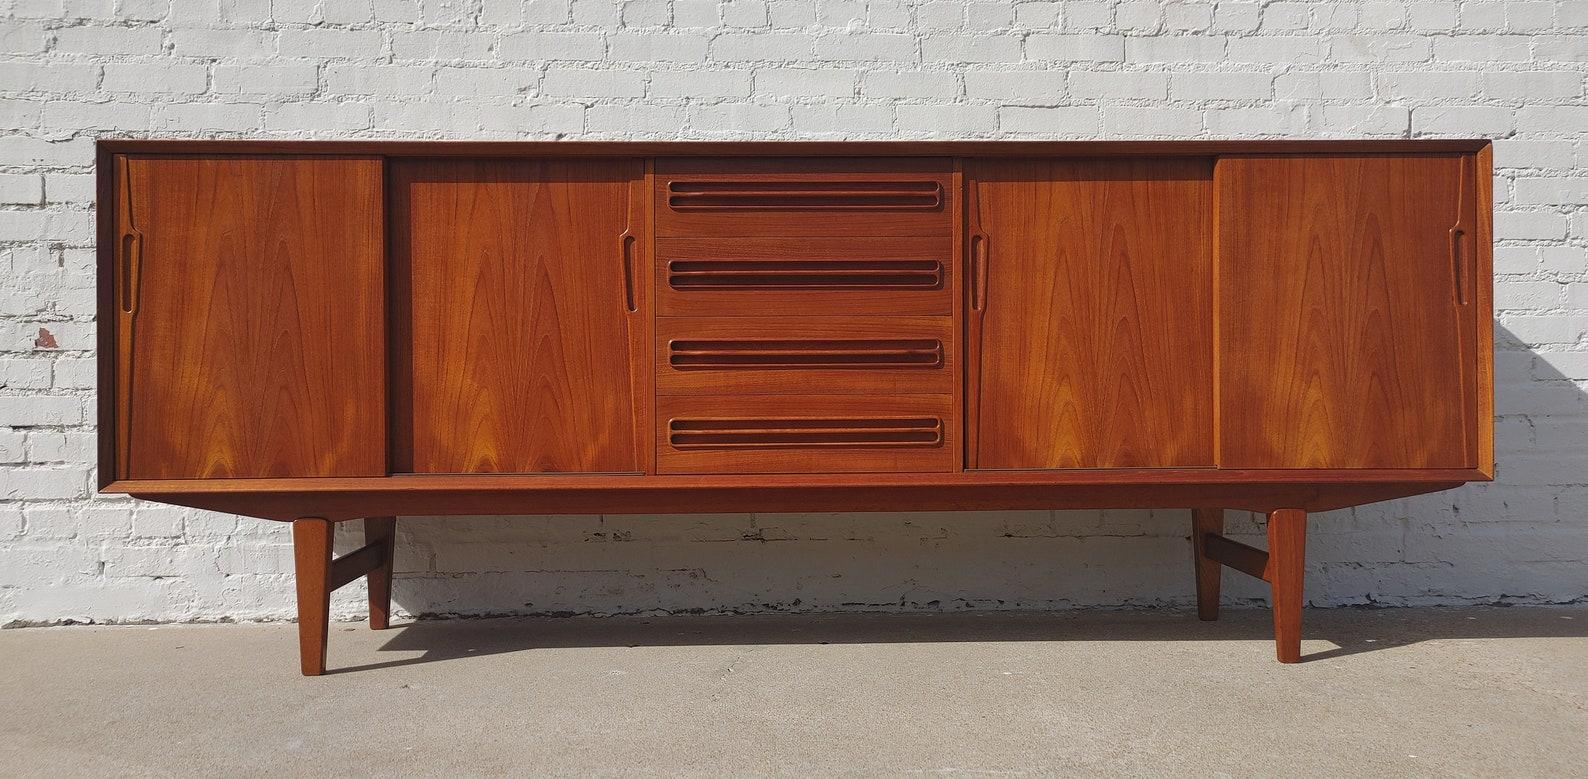 Mid Century Danish Modern Sideboard by Jensen & Molholm

Above average vintage condition and structurally sound. Has some expected slight finish wear and scratching. Top has been refinished and does not have original factory finish. Outdoor listing